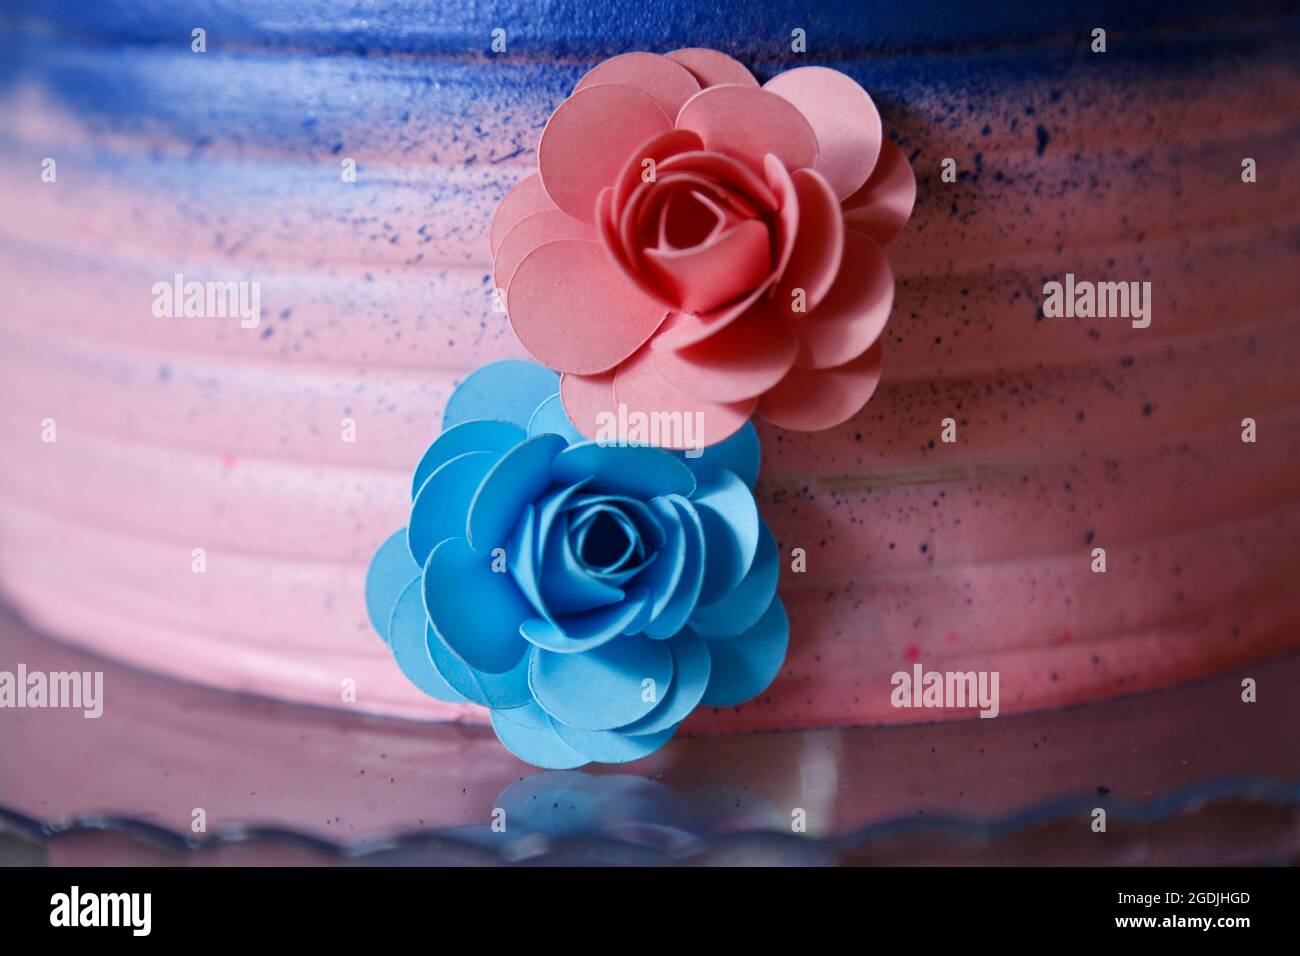 Blue and pink cake and flowers at revelation tea party - baby gender reveal party concept Stock Photo